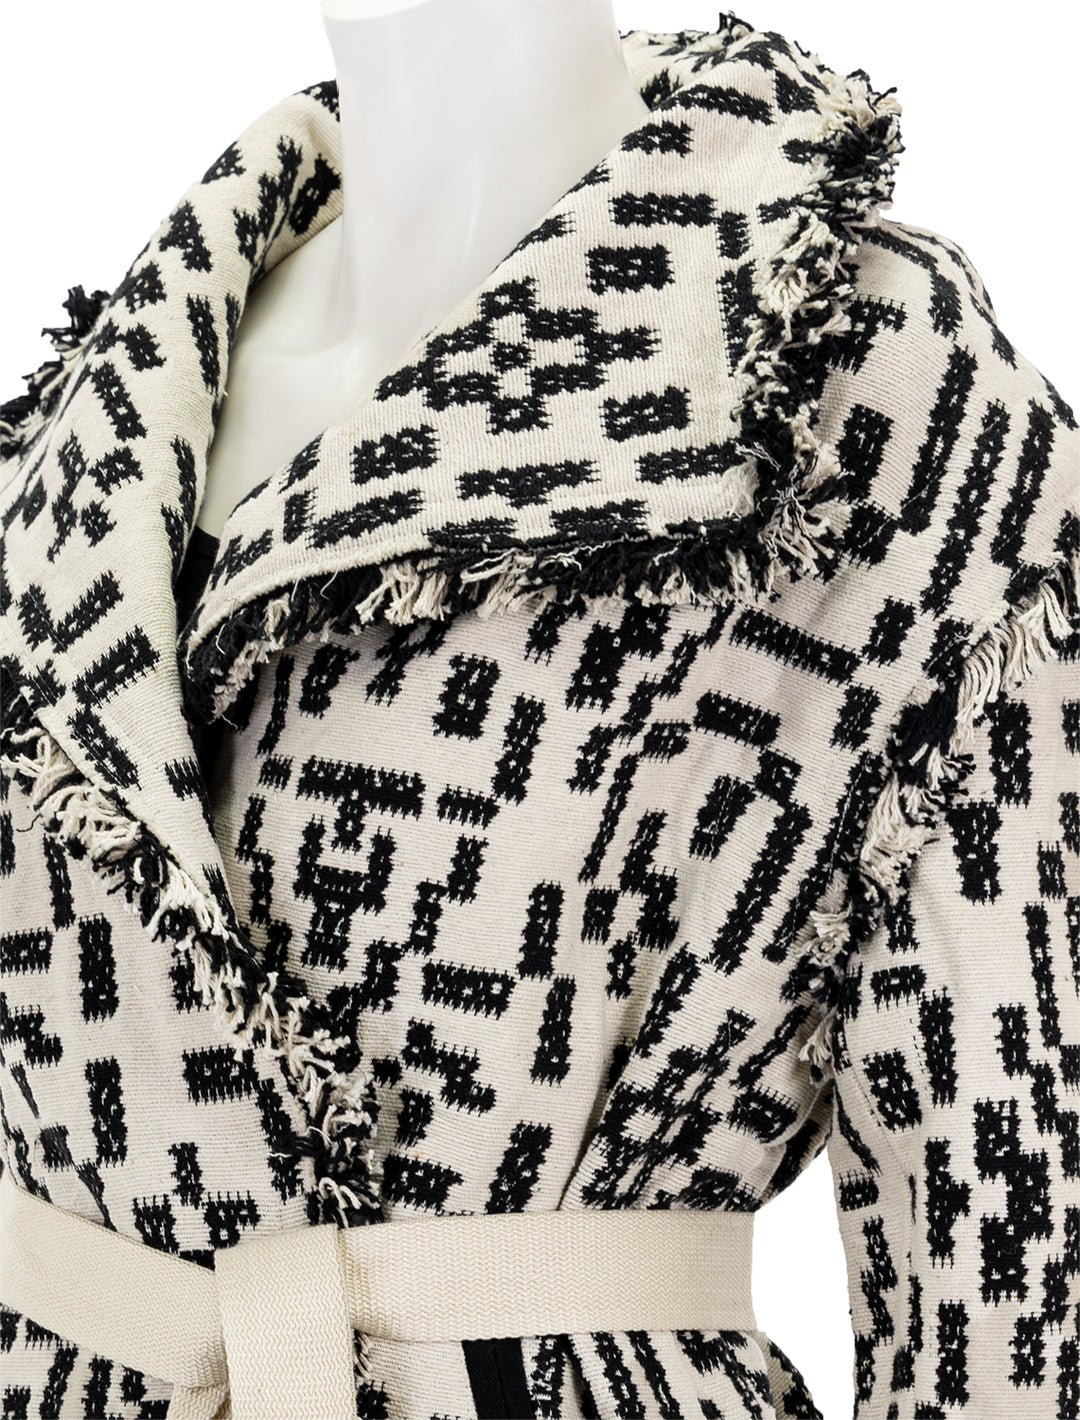 Close-up view of Isabel Marant Etoile's faith jacket in black and white.